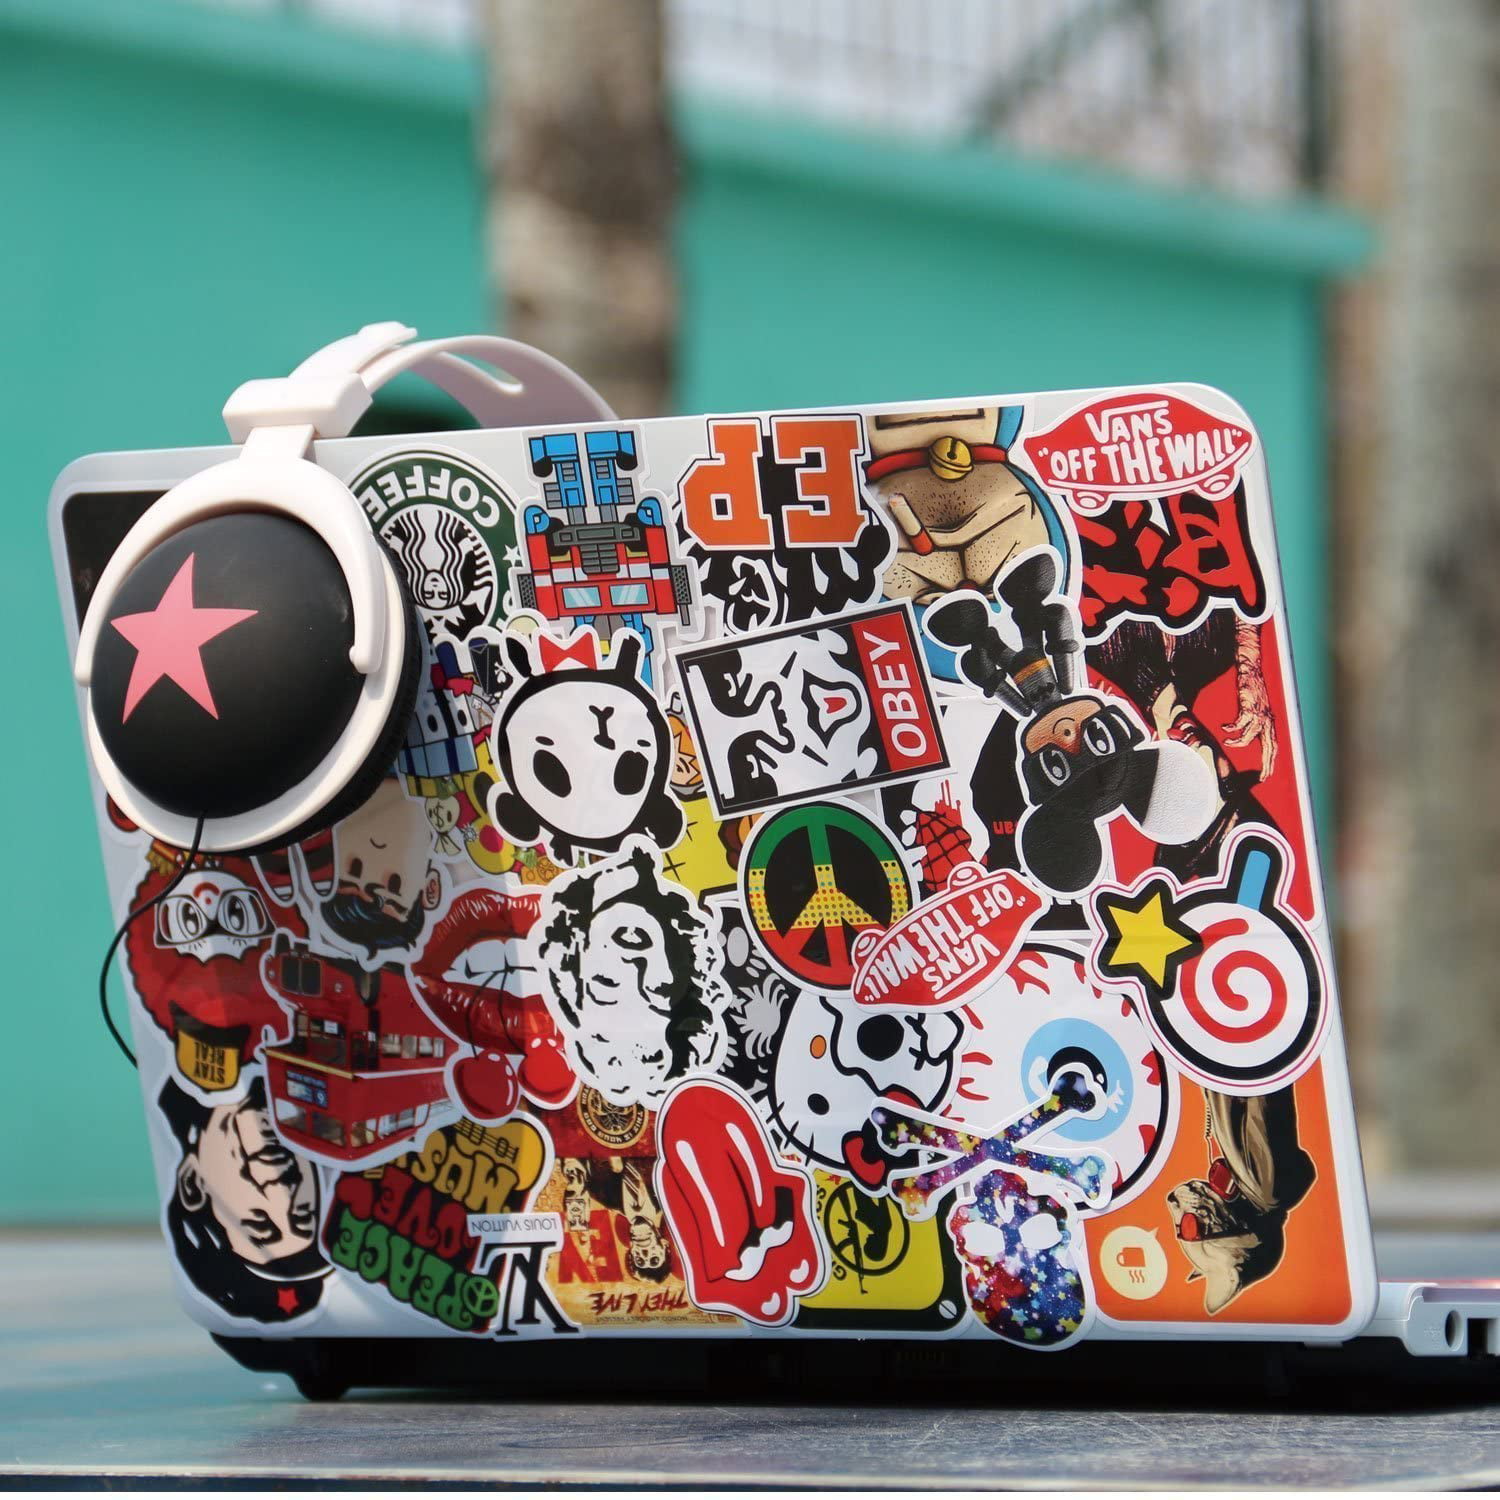 Cool Stickers 100pcs Outdoor Stickers Laptop Waterproof Trendy Sticker for Kids Teens Adults Suitable Notebook Phone Guitar Skateboard Luggage Travel SET-AZ046-100pcs 